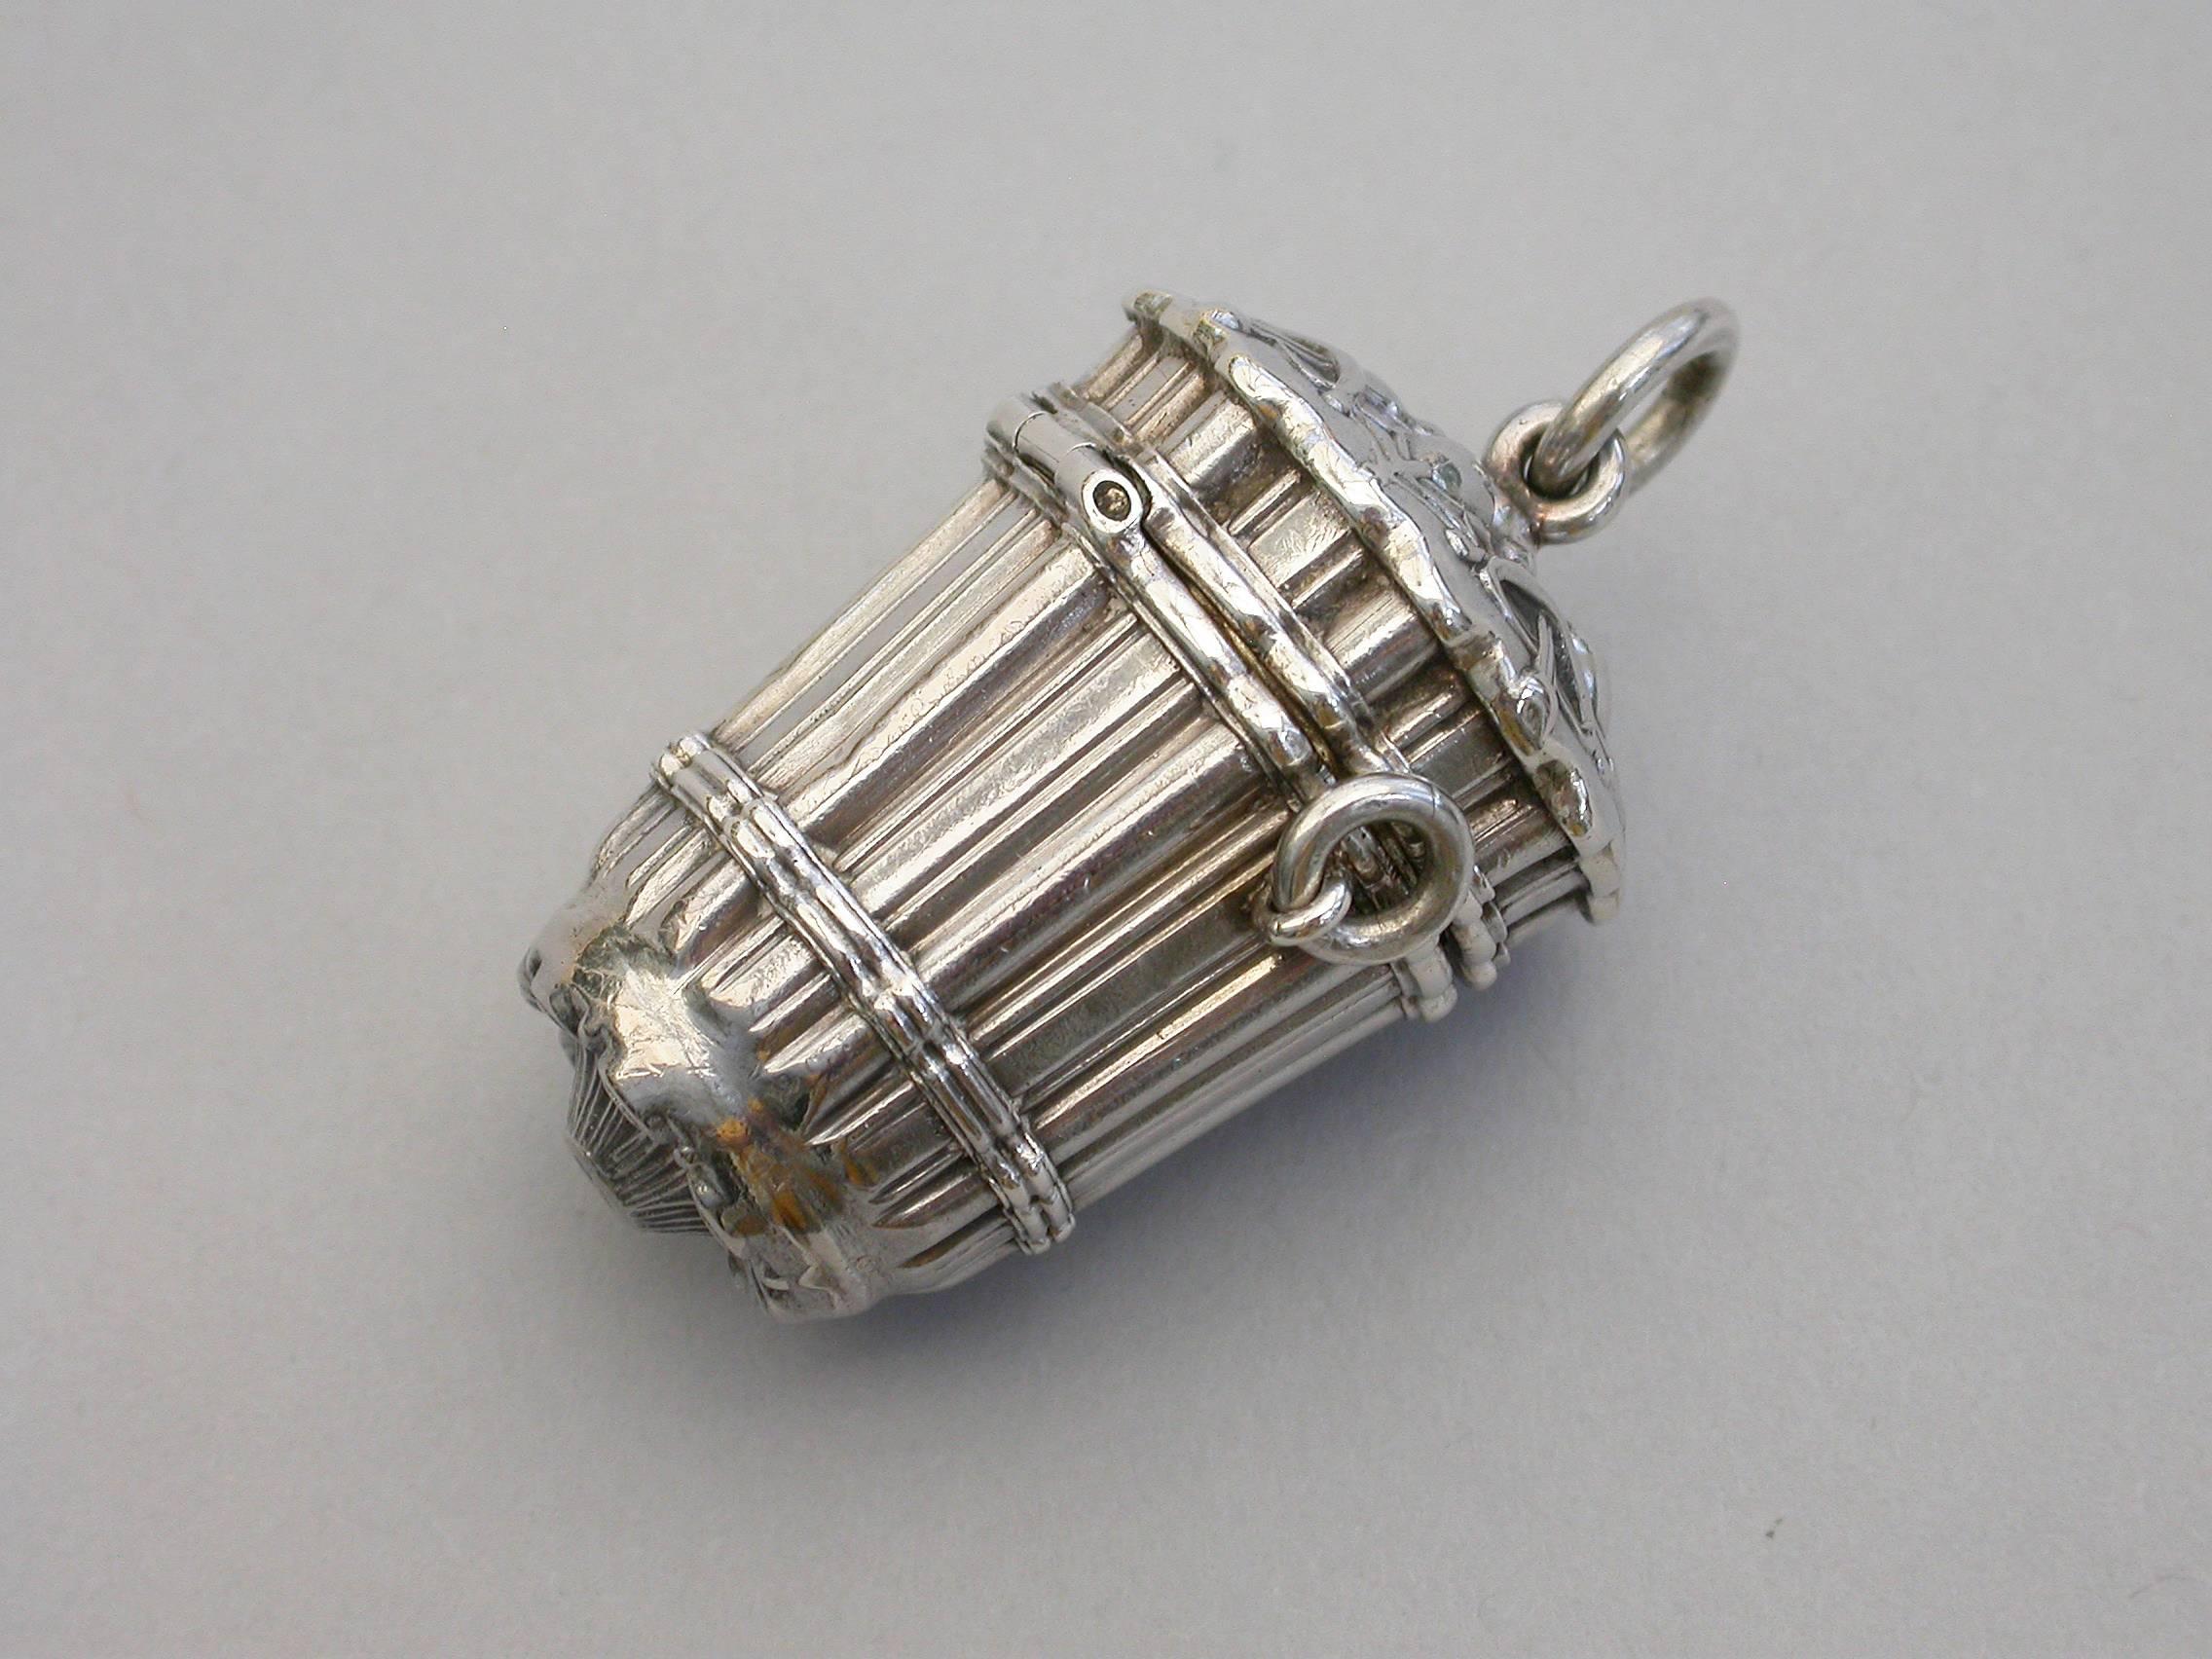 A rare Victorian novelty silver vinaigrette formed as a pannier of vertical reeds or straw bundles woven together, hinged at the shoulder with decorated lid and base, a pair of small rings to the sides and larger suspension ring to the lid. The